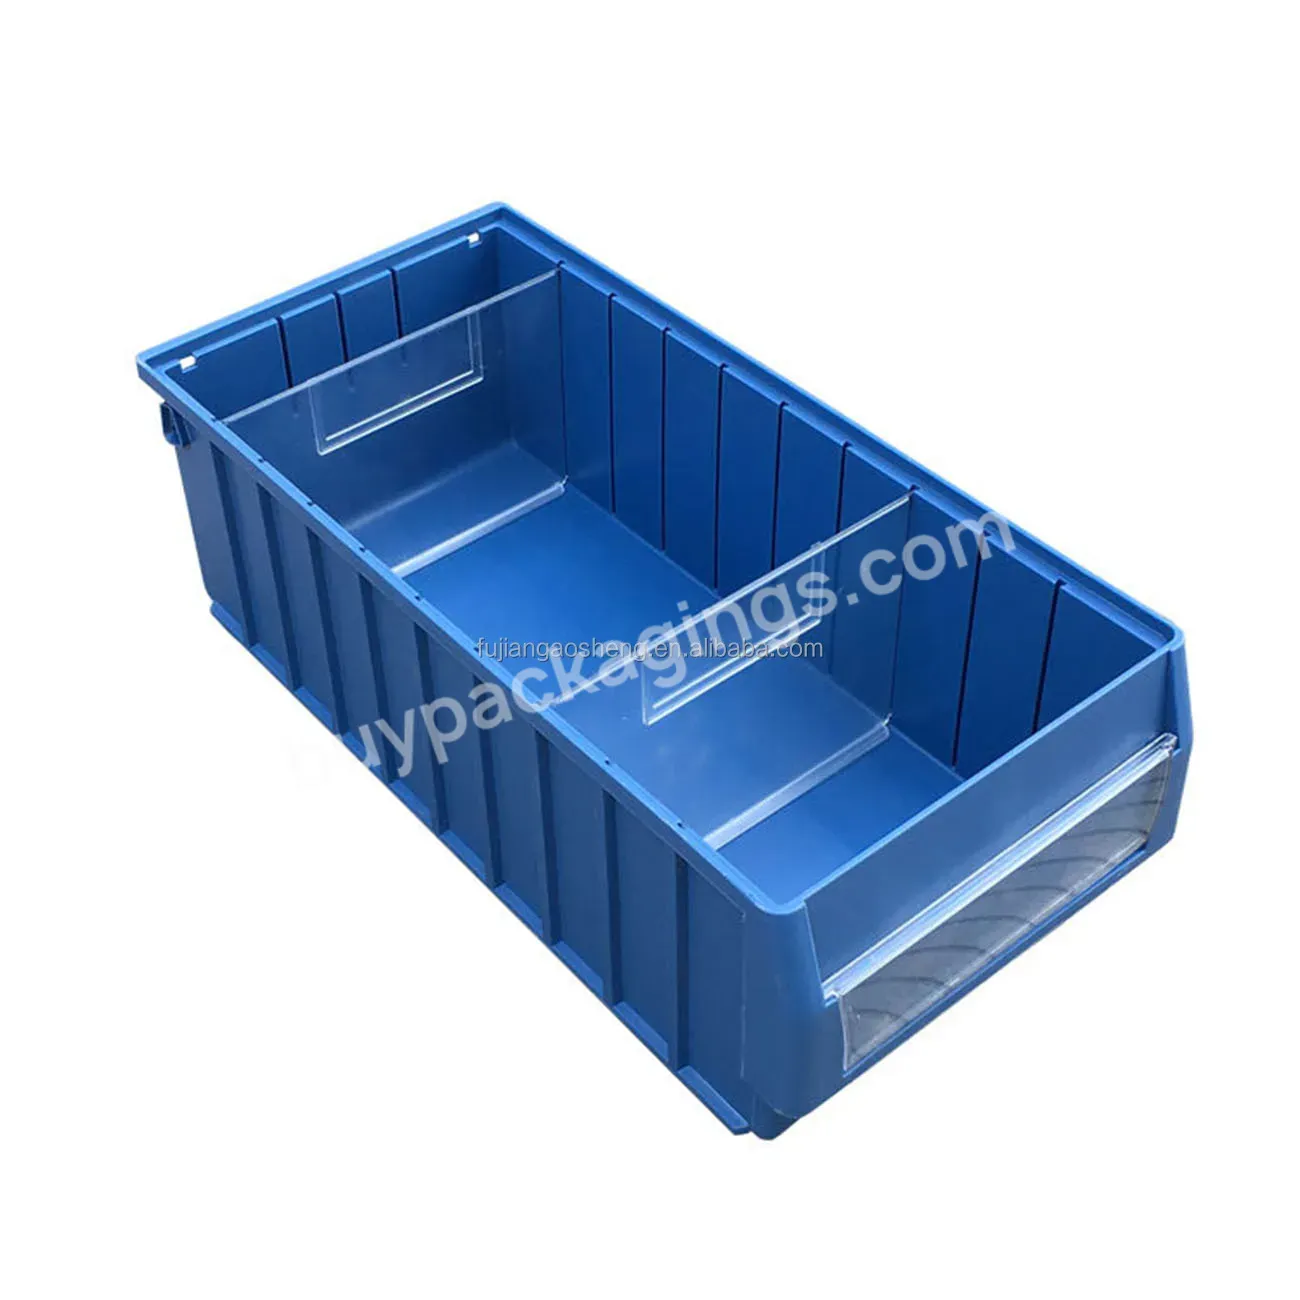 Plastic Spare Parts Box With Transparent Lenses Can Be Divided Randomly Plastic Divisible Storage Shelf Bins - Buy Kids Plastic Storage Bins,Cheap Plastic Storage Bins,Stackable Bread Bin.